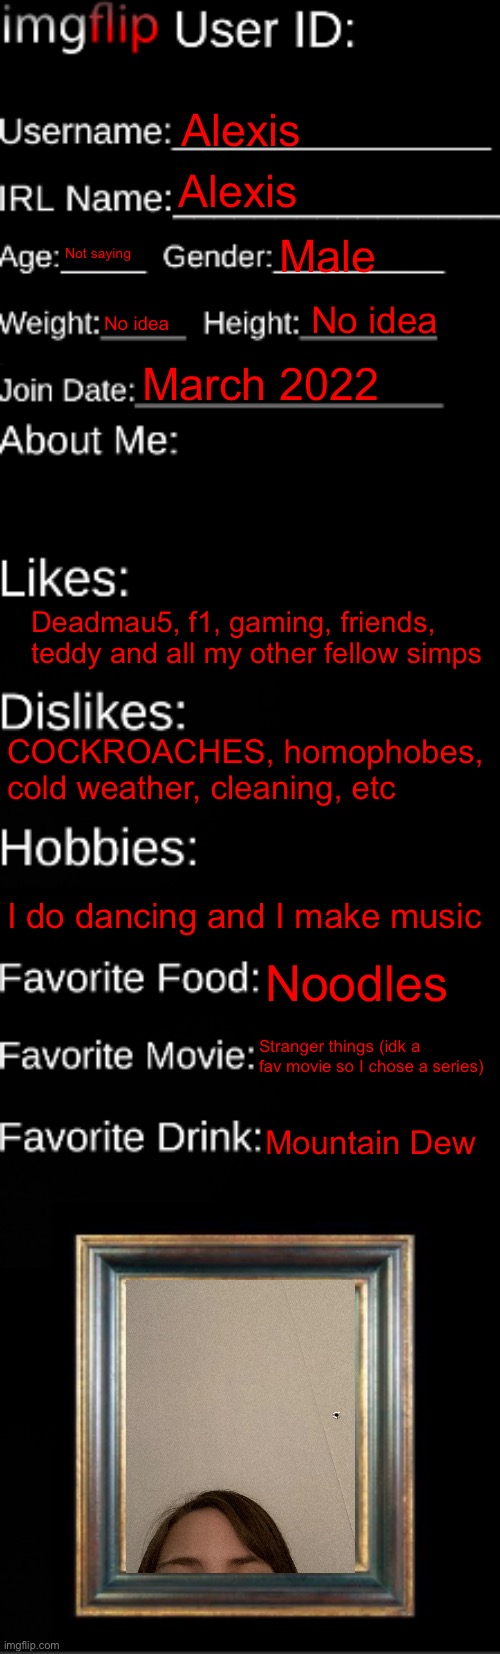 imgflip ID Card | Alexis; Alexis; Not saying; Male; No idea; No idea; March 2022; Deadmau5, f1, gaming, friends, teddy and all my other fellow simps; COCKROACHES, homophobes, cold weather, cleaning, etc; I do dancing and I make music; Noodles; Stranger things (idk a fav movie so I chose a series); Mountain Dew | image tagged in imgflip id card | made w/ Imgflip meme maker